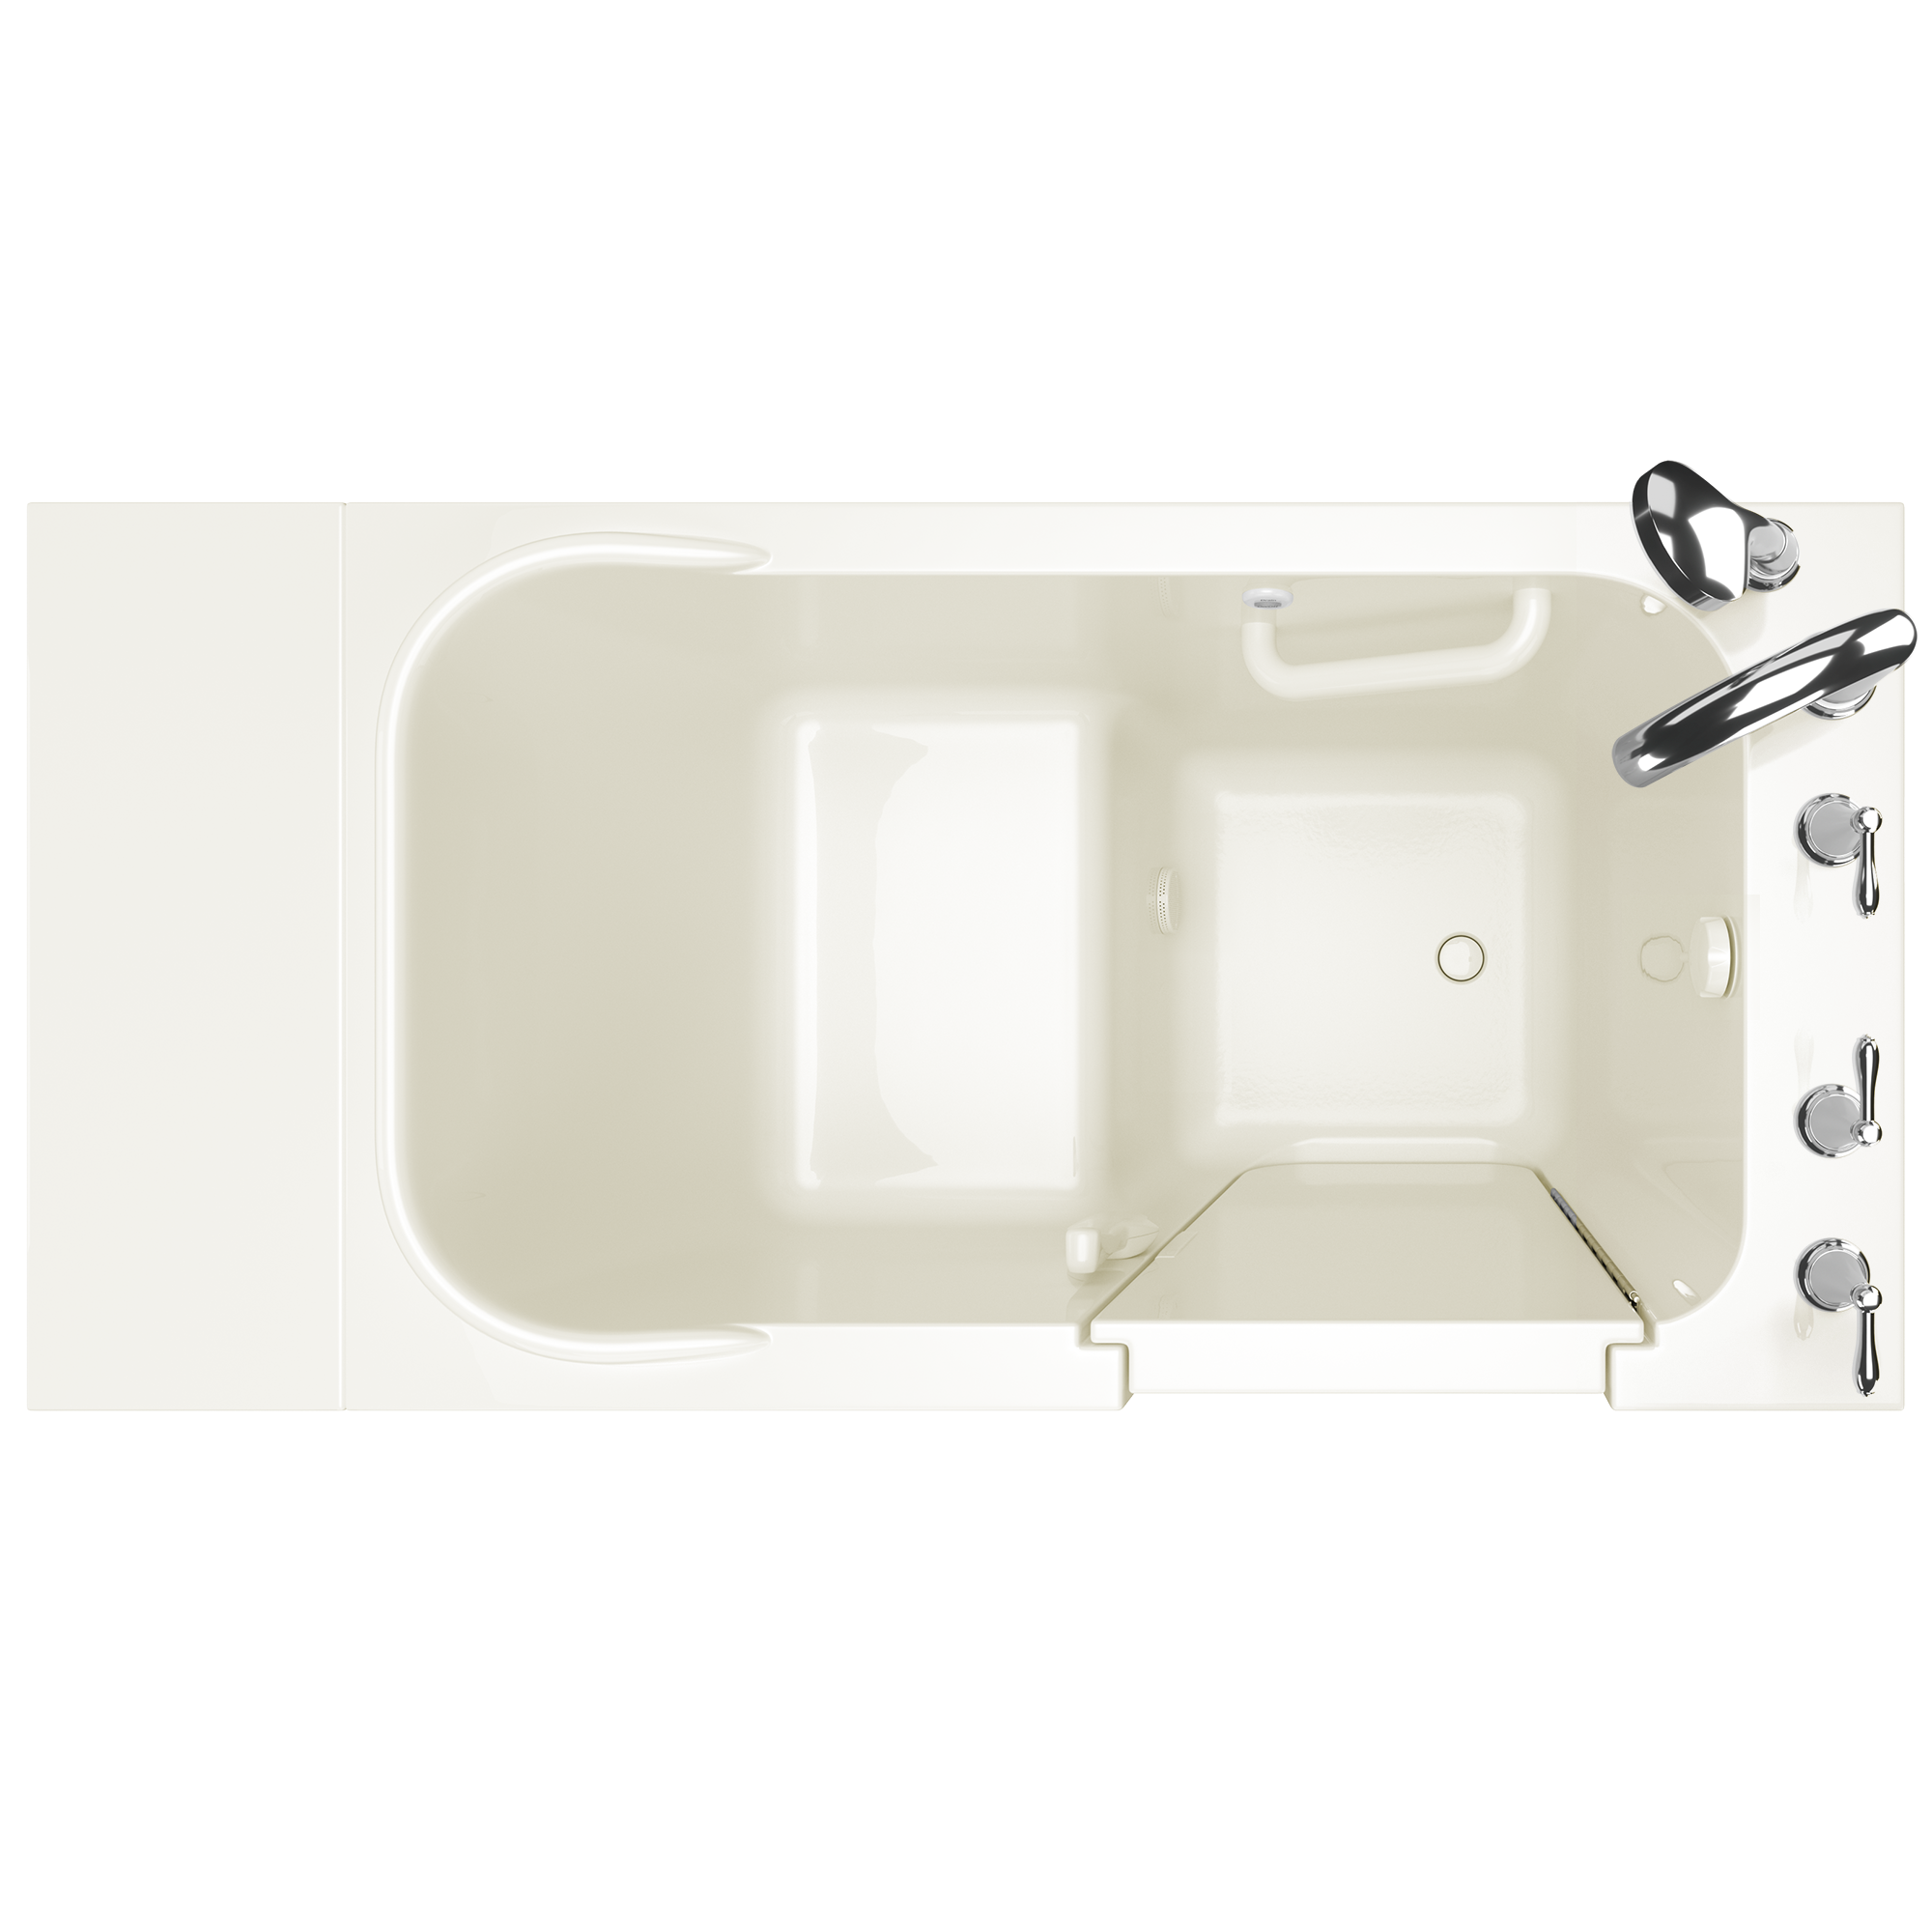 Gelcoat Value Series 28 x 48-Inch Walk-in Tub With Soaker System - Right-Hand Drain With Faucet